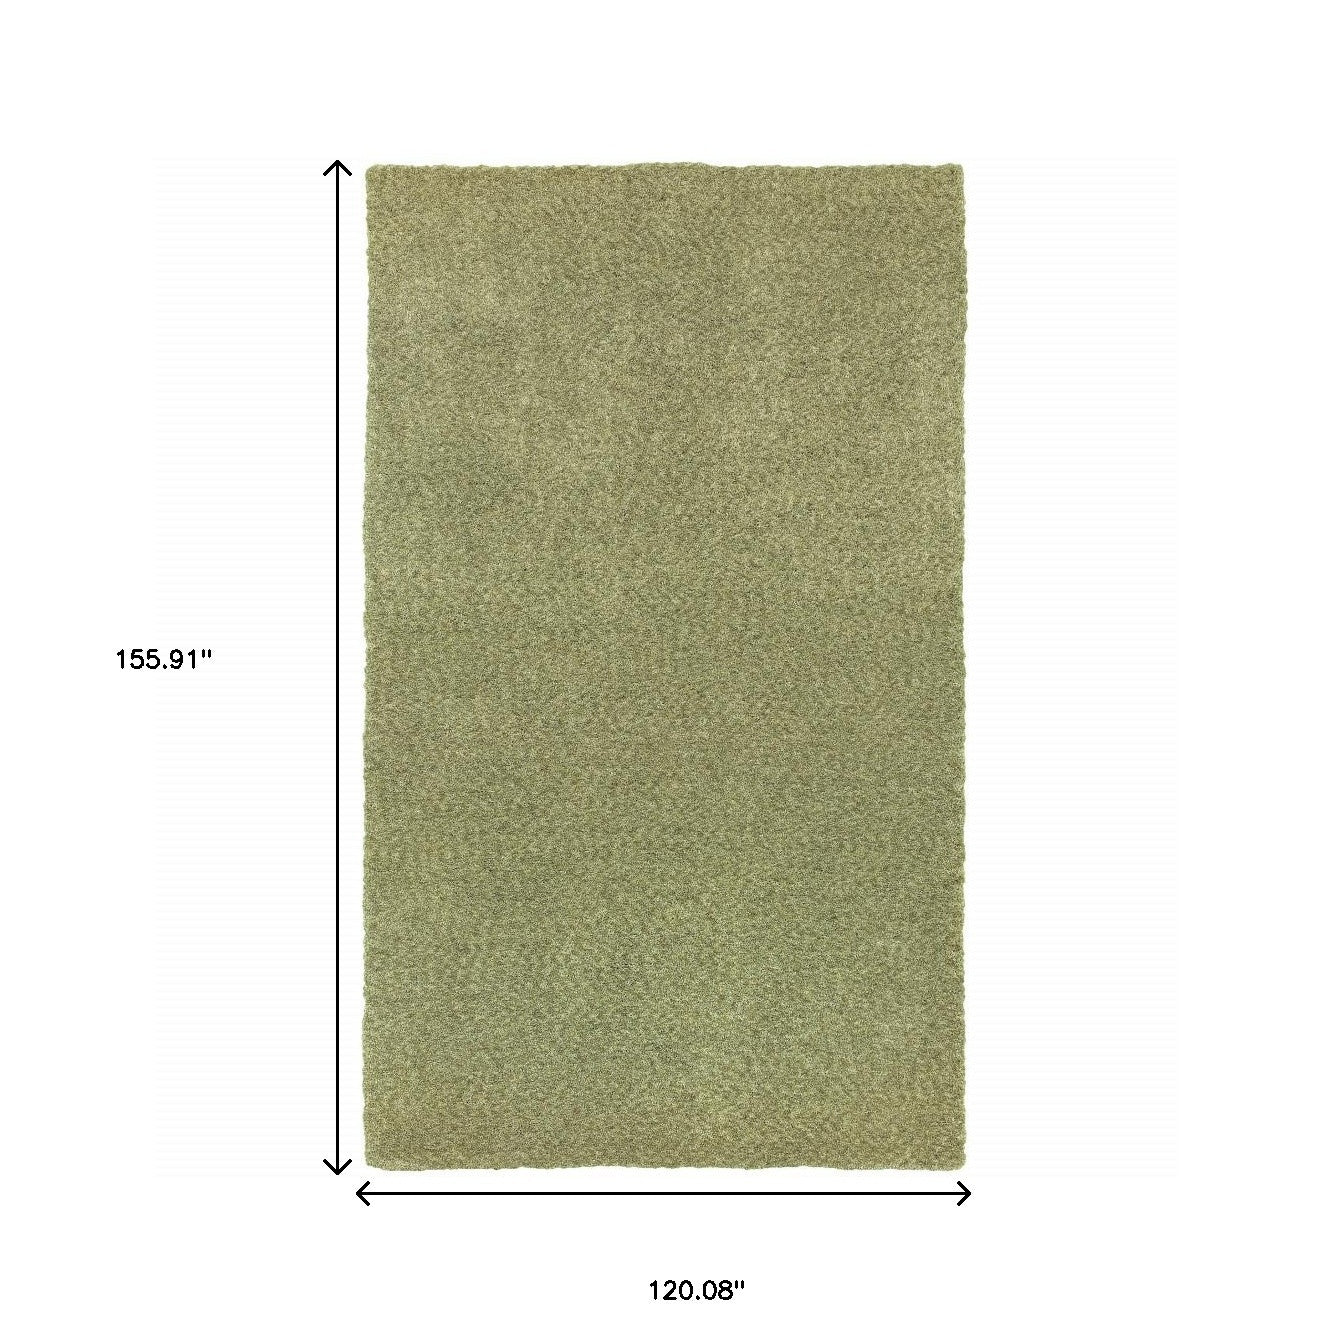 10' X 13' Olive Green Shag Tufted Handmade Stain Resistant Area Rug